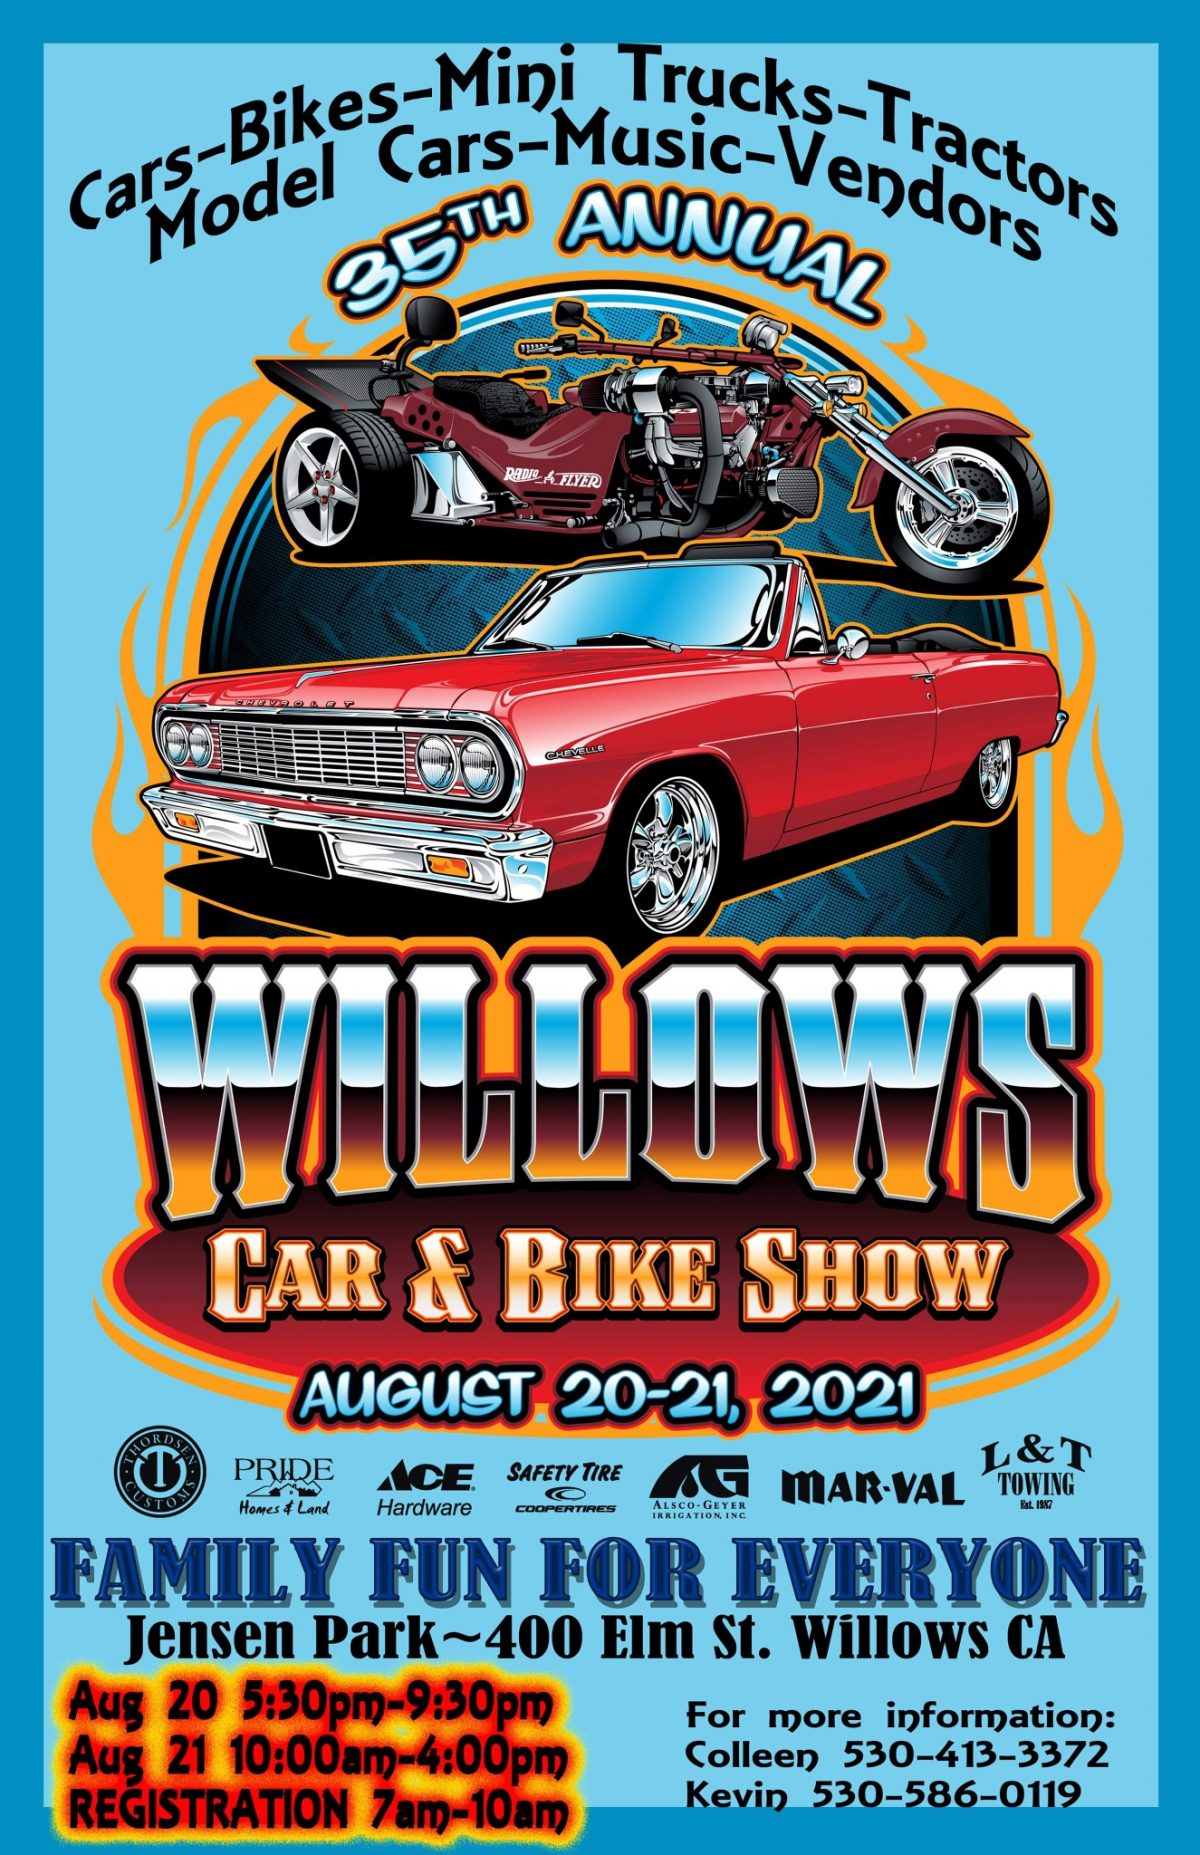 The 35th Annual Willows Car and Bike Show